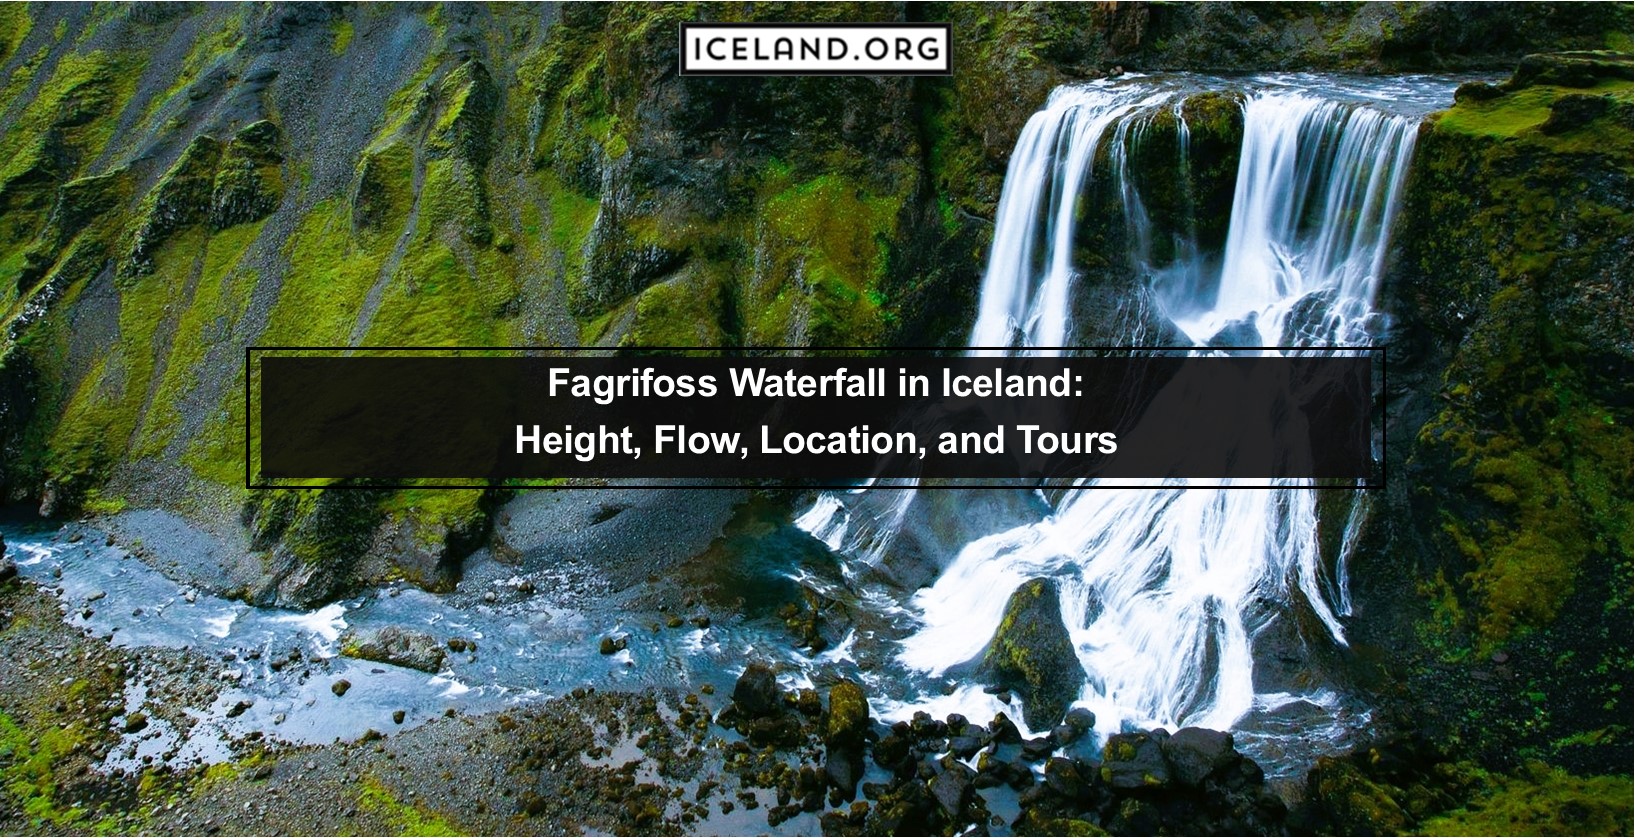 Fagrifoss Waterfall in Iceland